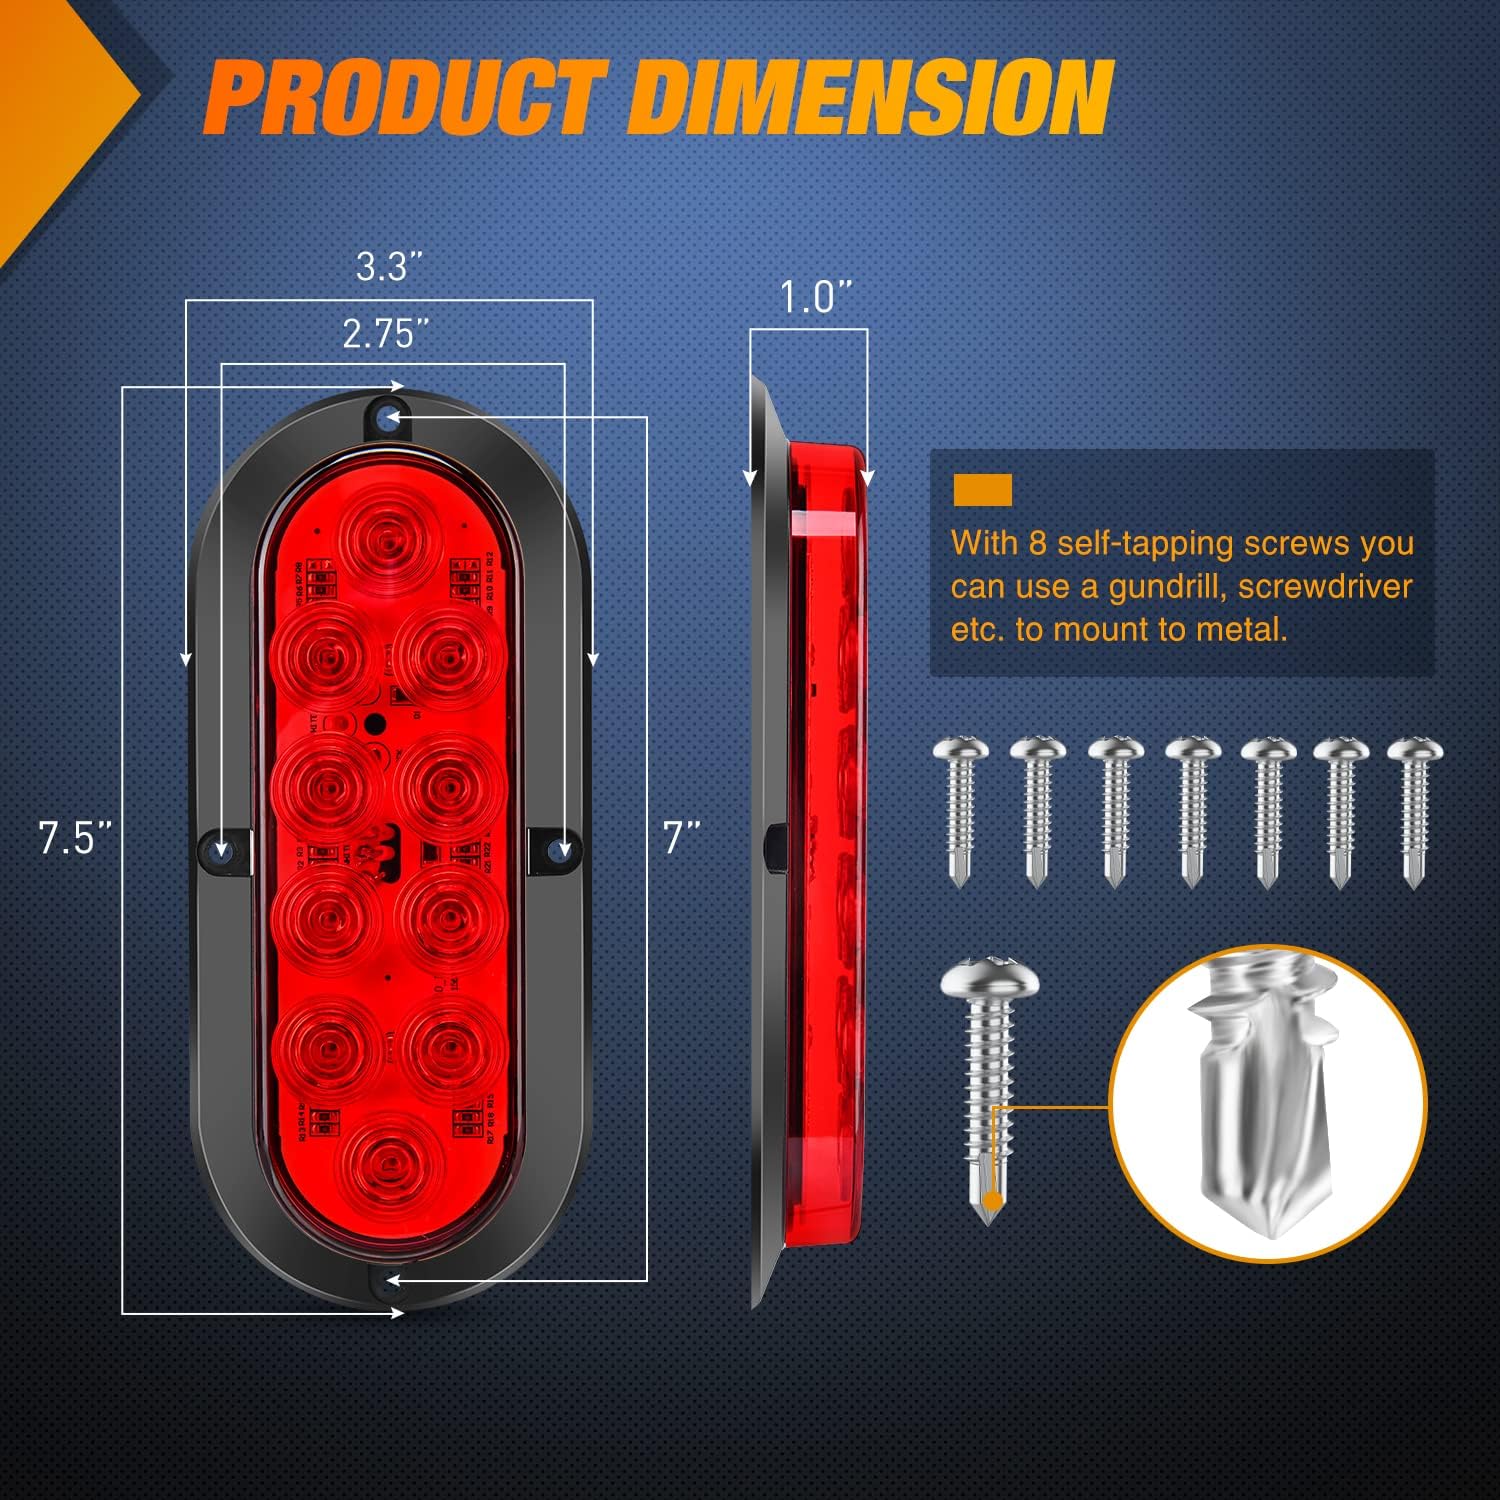 6" Oval Red White Amber Upgrade LED Trailer Tail Lights (6PCS) Nilight